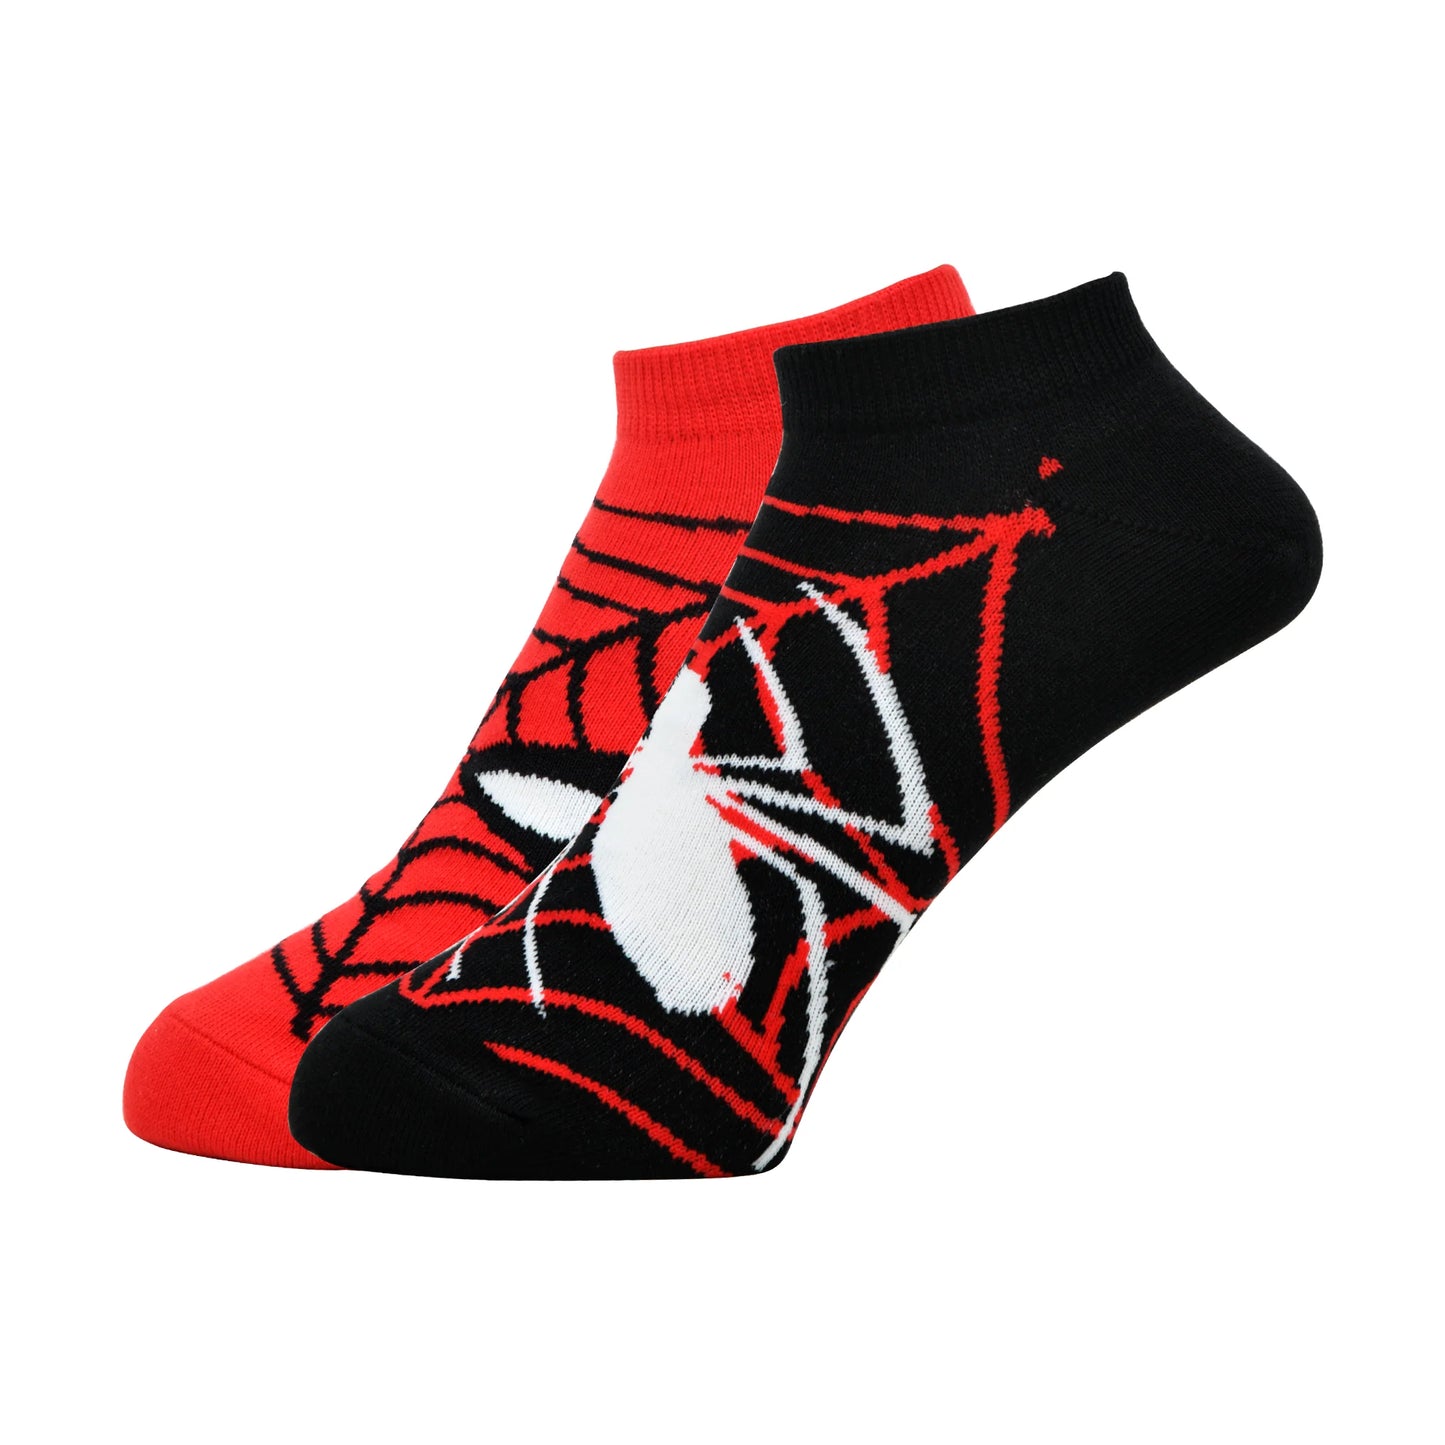 BALENZIA X MARVEL THE AMAZING SPIDER-MAN THEMED ANKLE LENGTH SOCKS FOR MEN (PACK OF 2 PAIRS/1U)(FREE SIZE) RED,BLUE